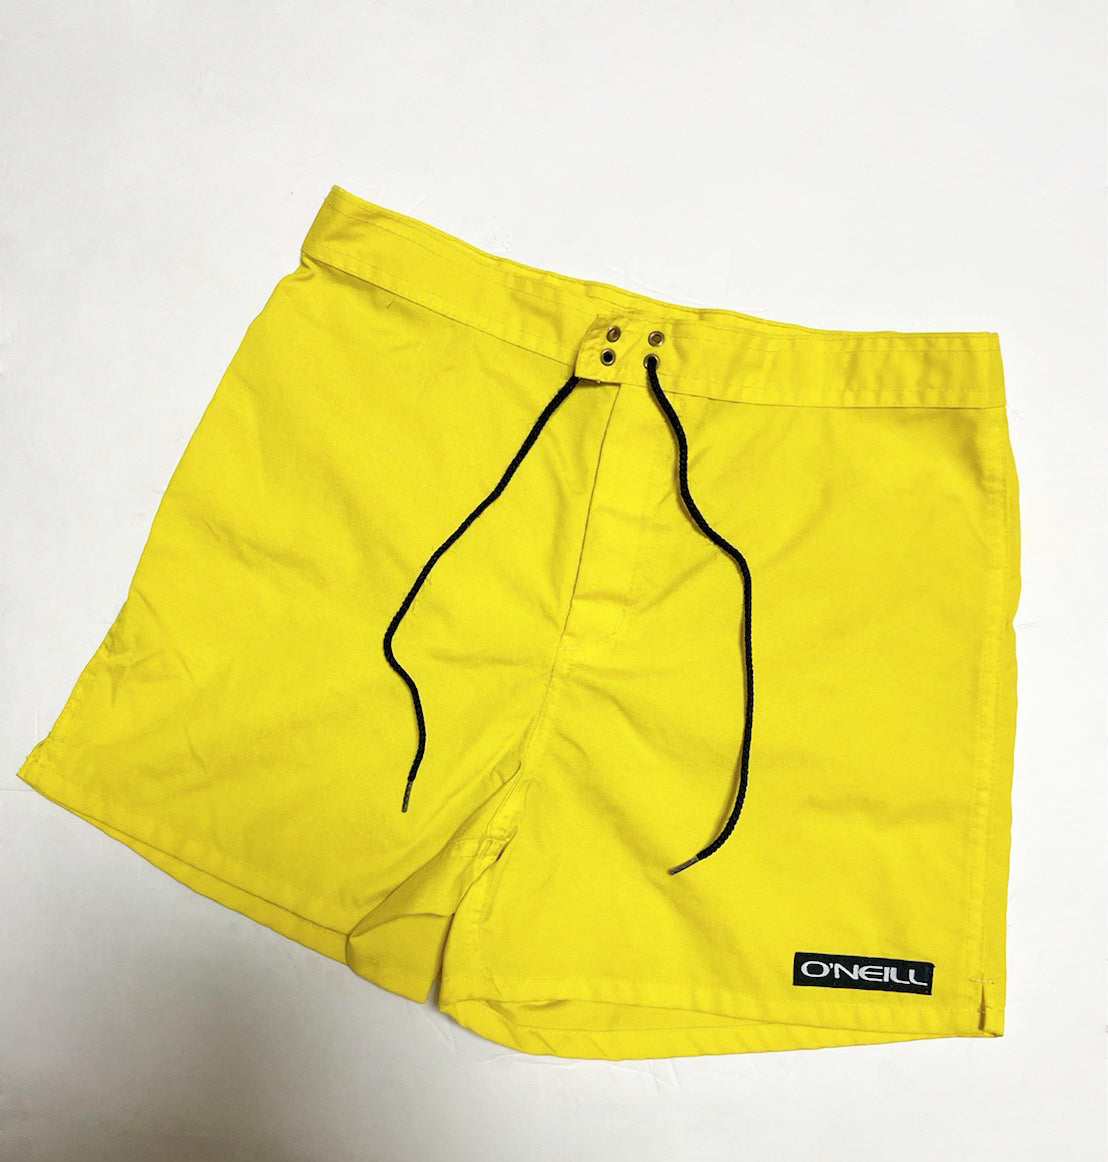 80s O'Neill board shorts USA made in USA size 30 オニール メンズ